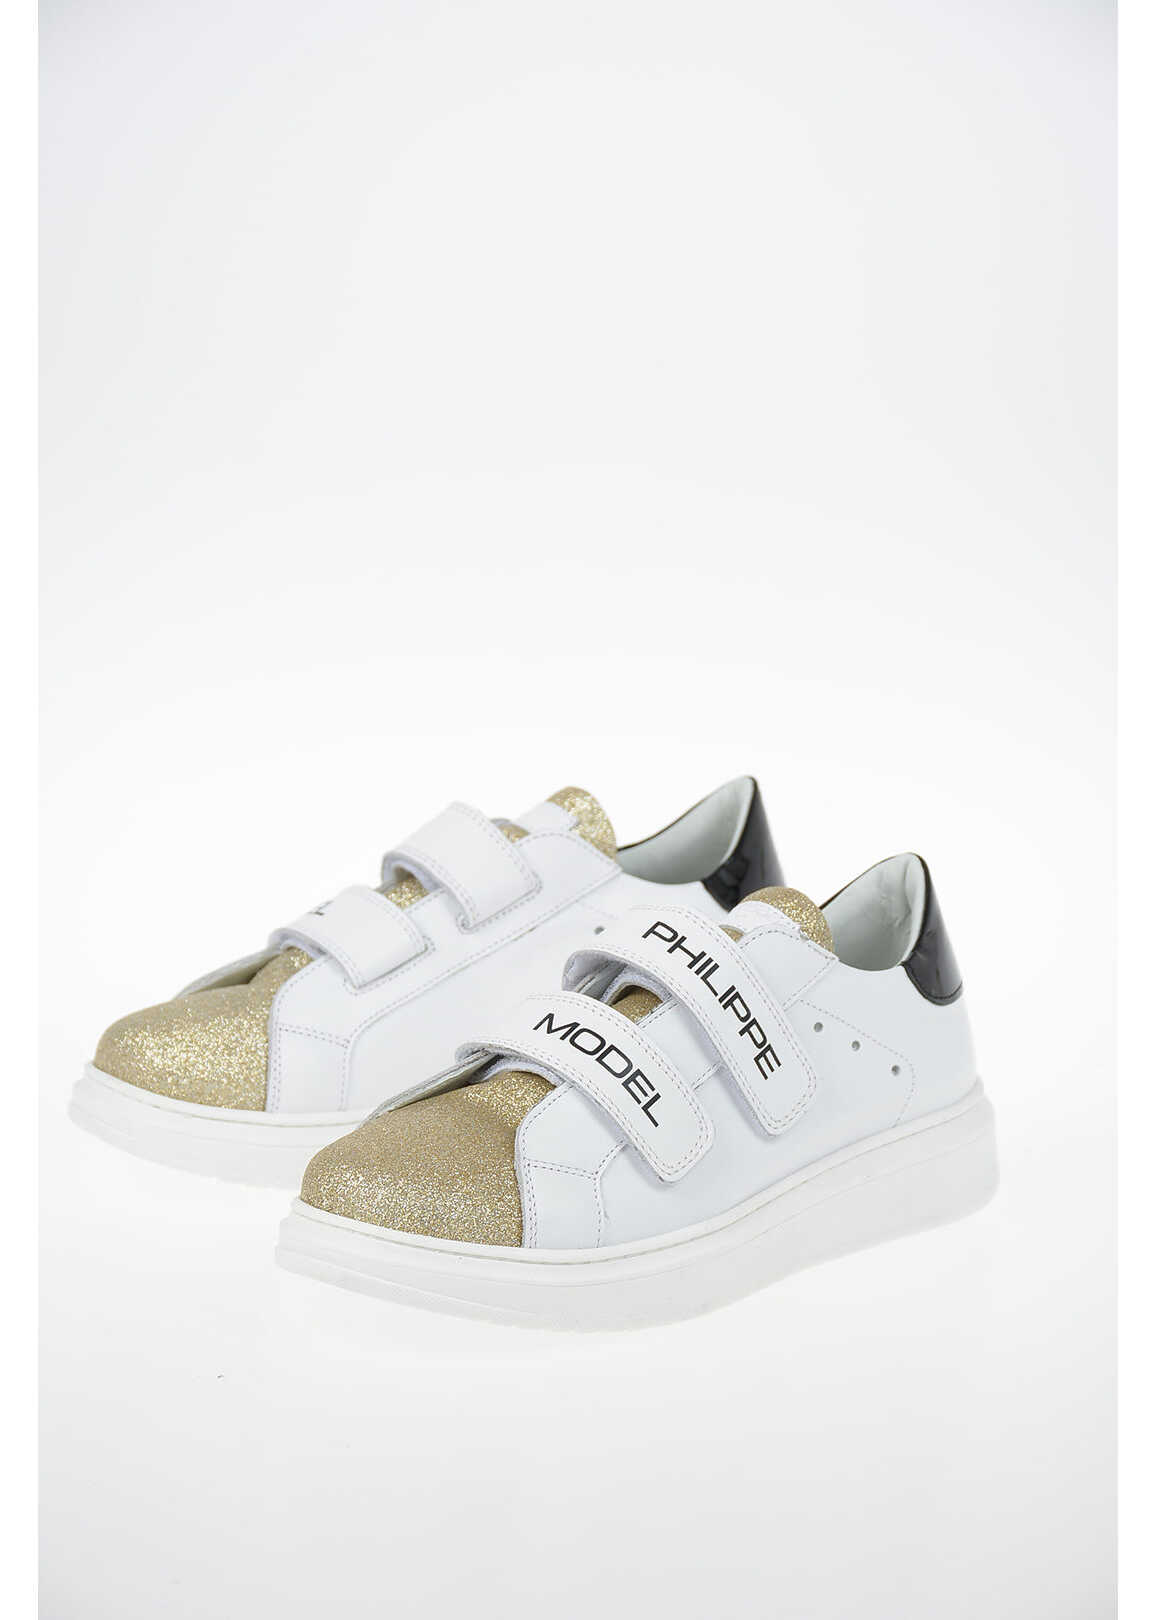 Philippe Model Leather Glittered Granville Sneakers White